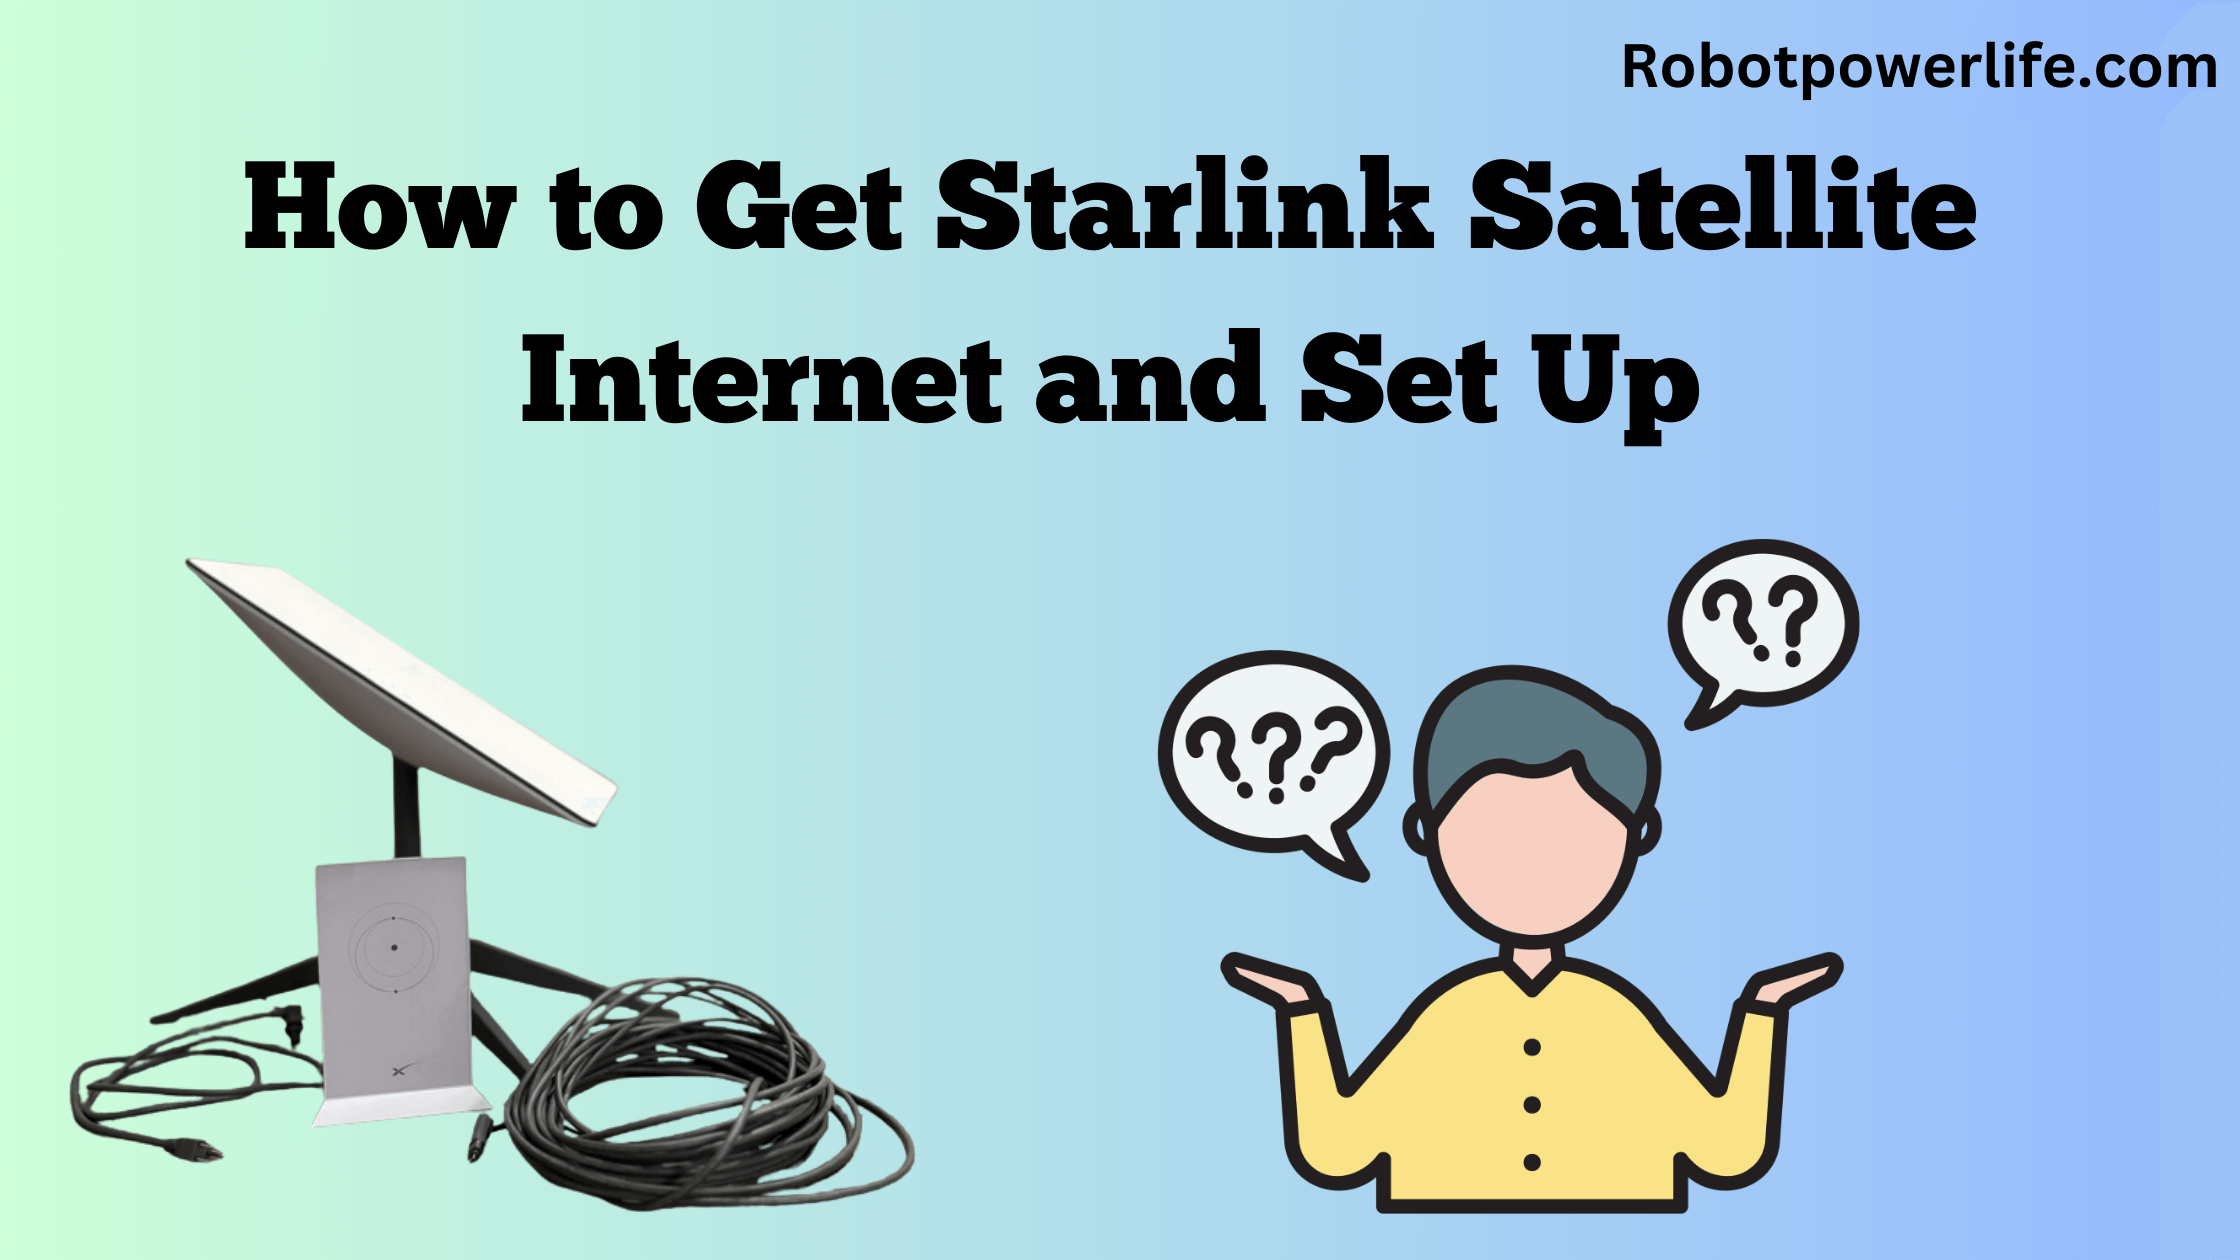 How to Get Starlink Satellite Internet and Set Up